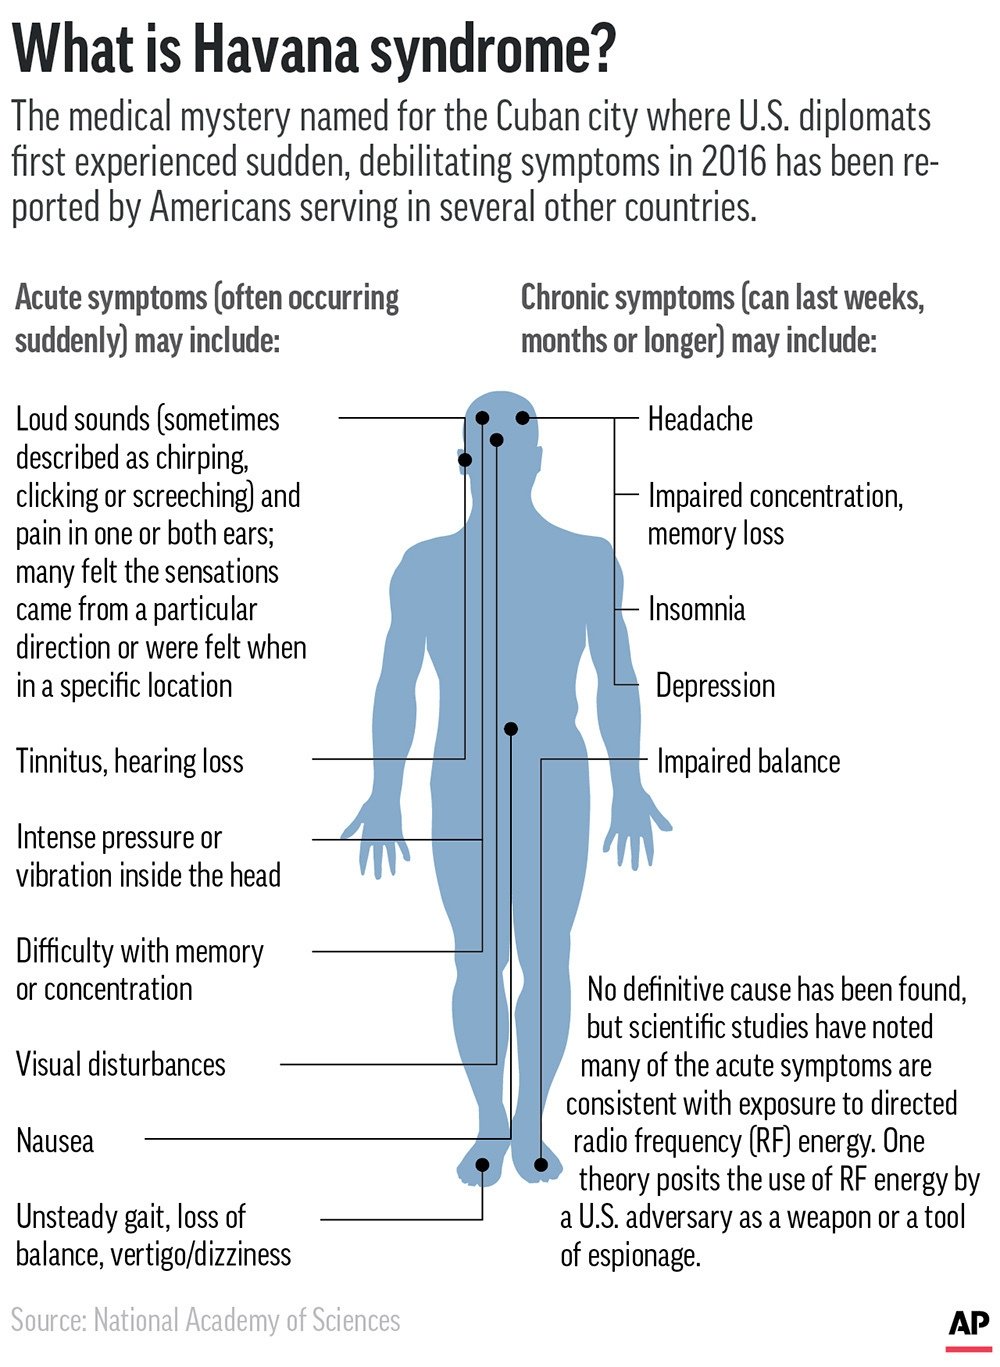 Symptoms associated with Havana syndrome, which has afflicted Americans serving at diplomatic posts in several countries. (AP Graphic)